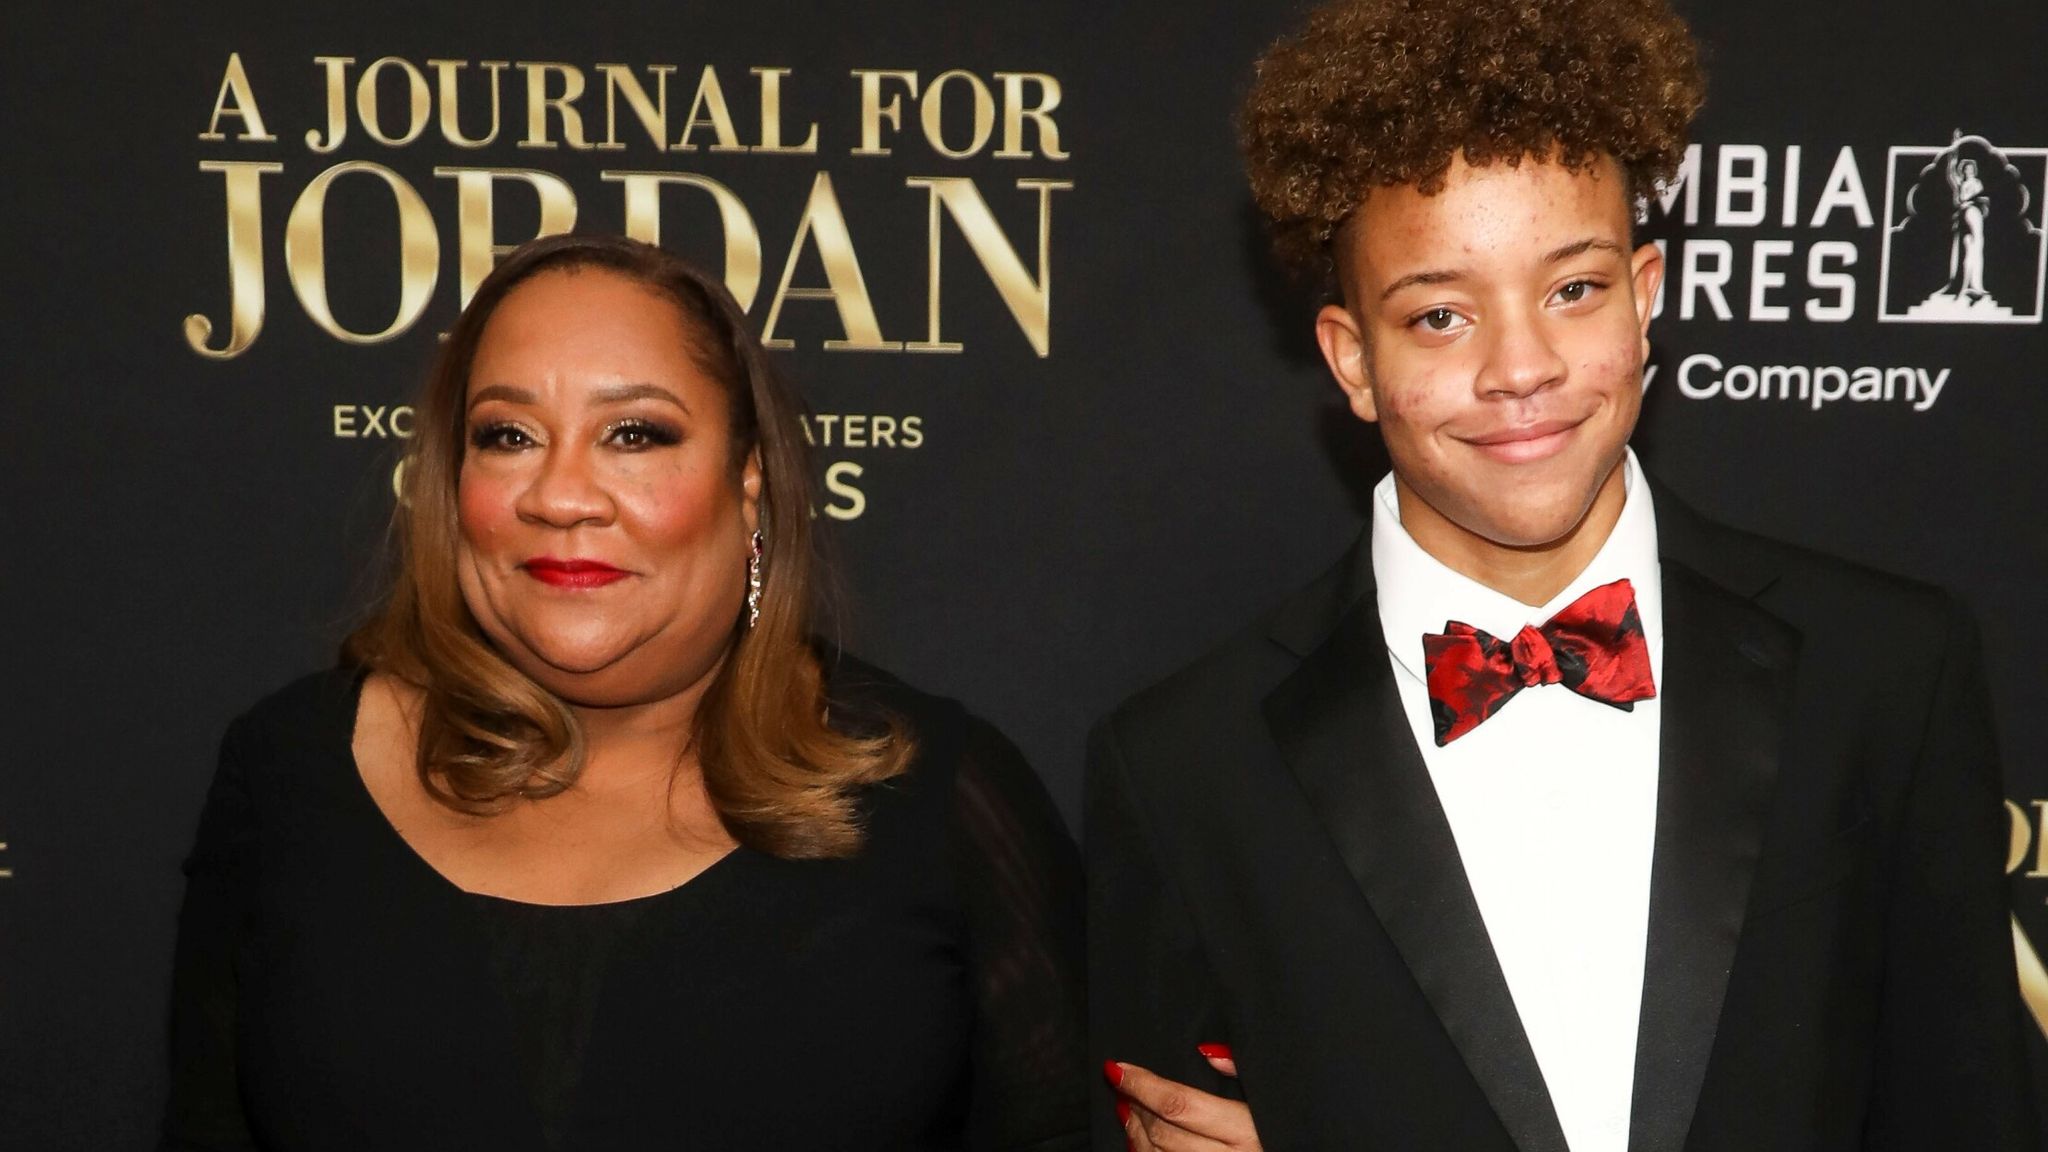 Author Dana Canedy, left, and her son Jordan Canedy at the premiere of A Journal For Jordan in New York in December 2021. Pic: Andy Kropa/Invision/AP